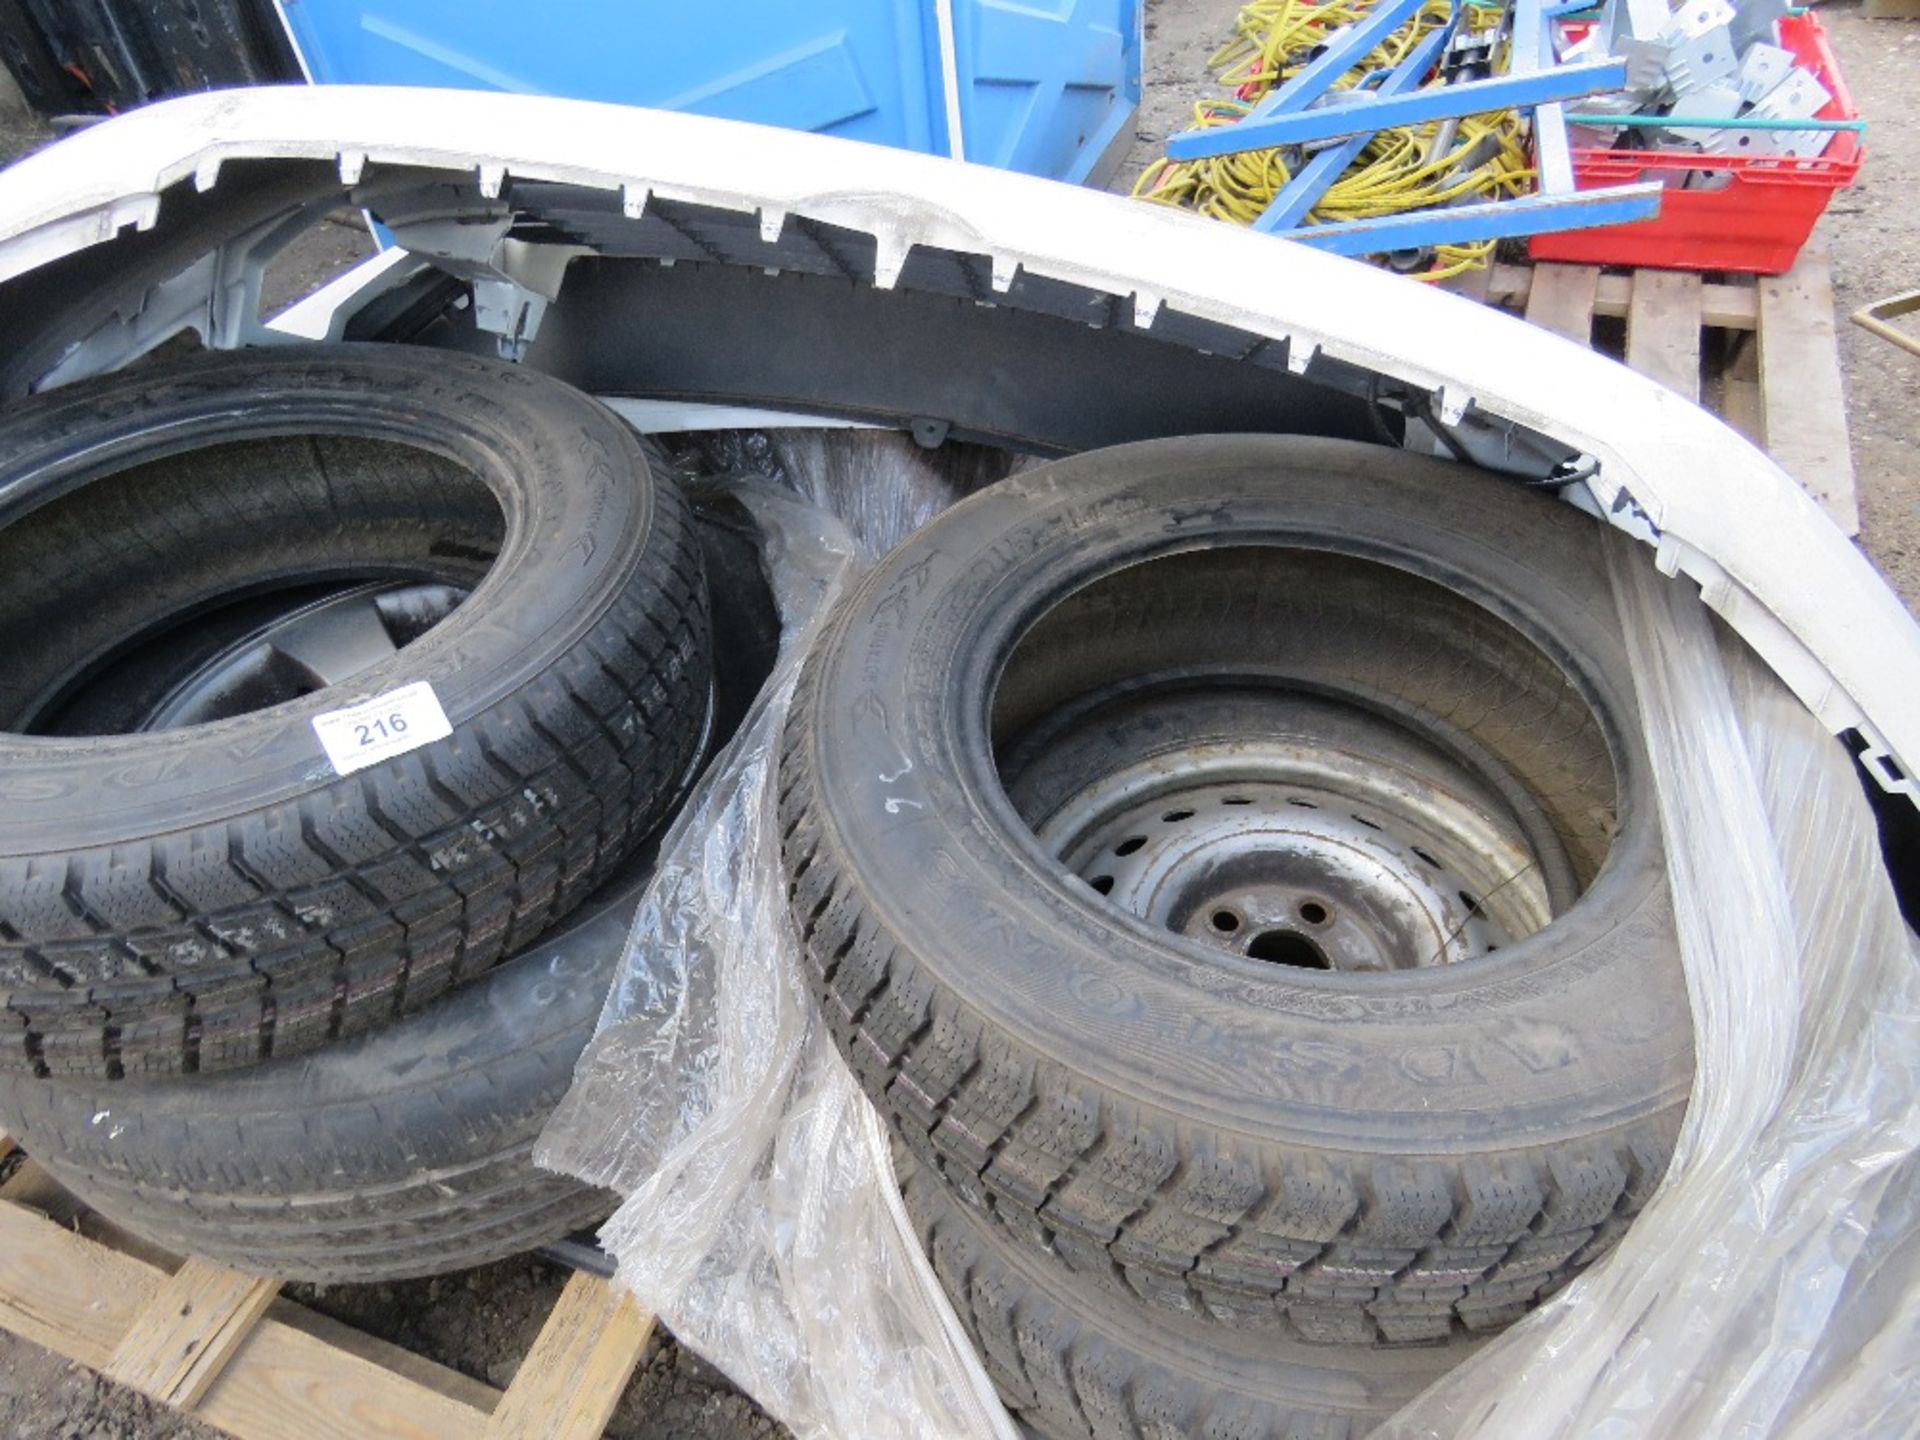 Pallet of vehicle spares